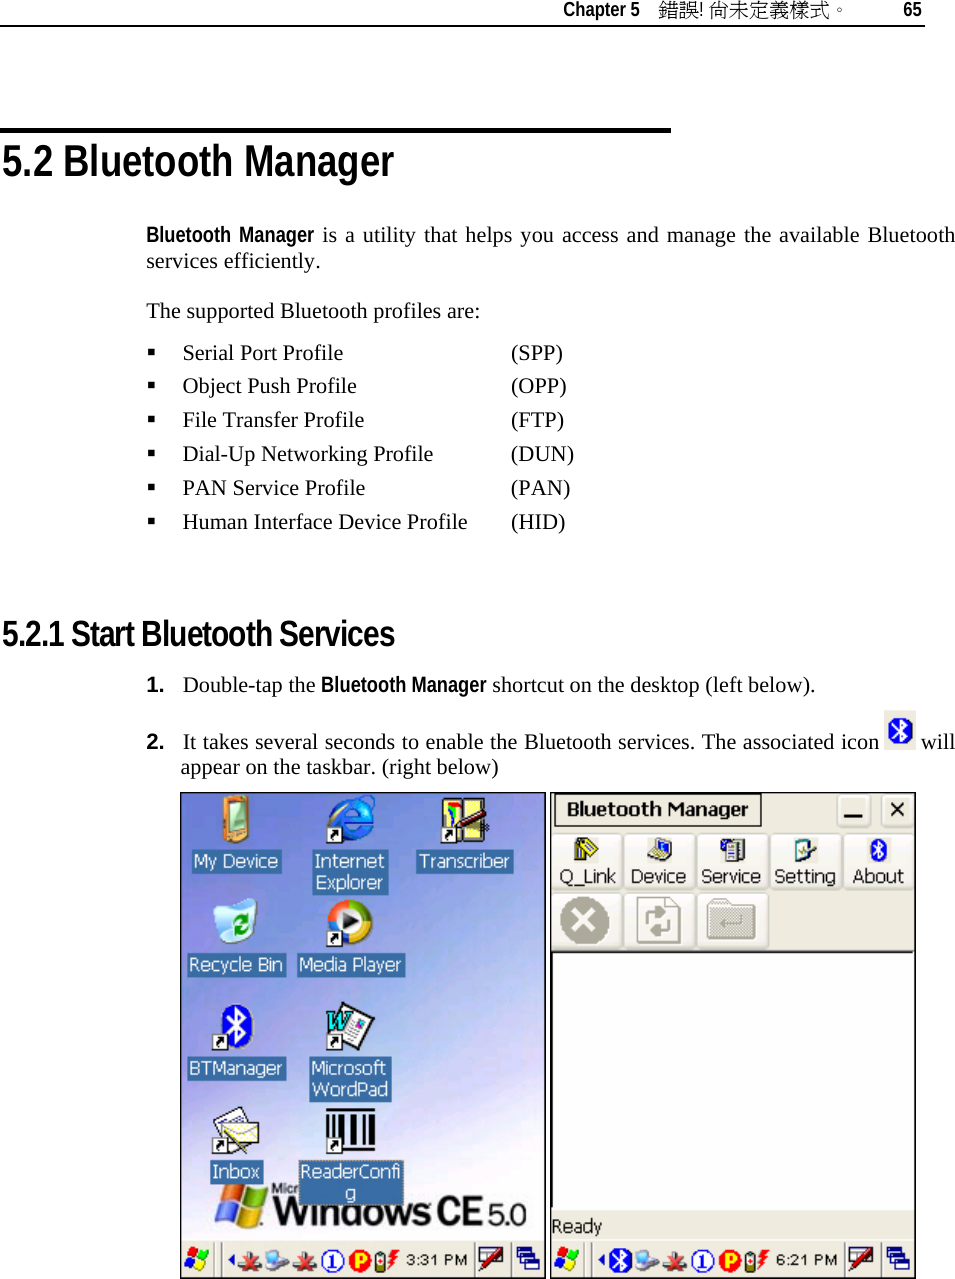    Chapter 5    錯誤! 尚未定義樣式。 65   5.2 Bluetooth Manager Bluetooth Manager is a utility that helps you access and manage the available Bluetooth services efficiently. The supported Bluetooth profiles are:  Serial Port Profile      (SPP)  Object Push Profile     (OPP)  File Transfer Profile     (FTP)  Dial-Up Networking Profile   (DUN)  PAN Service Profile    (PAN)  Human Interface Device Profile  (HID)  5.2.1 Start Bluetooth Services 1.  Double-tap the Bluetooth Manager shortcut on the desktop (left below).  2.  It takes several seconds to enable the Bluetooth services. The associated icon   will appear on the taskbar. (right below)    